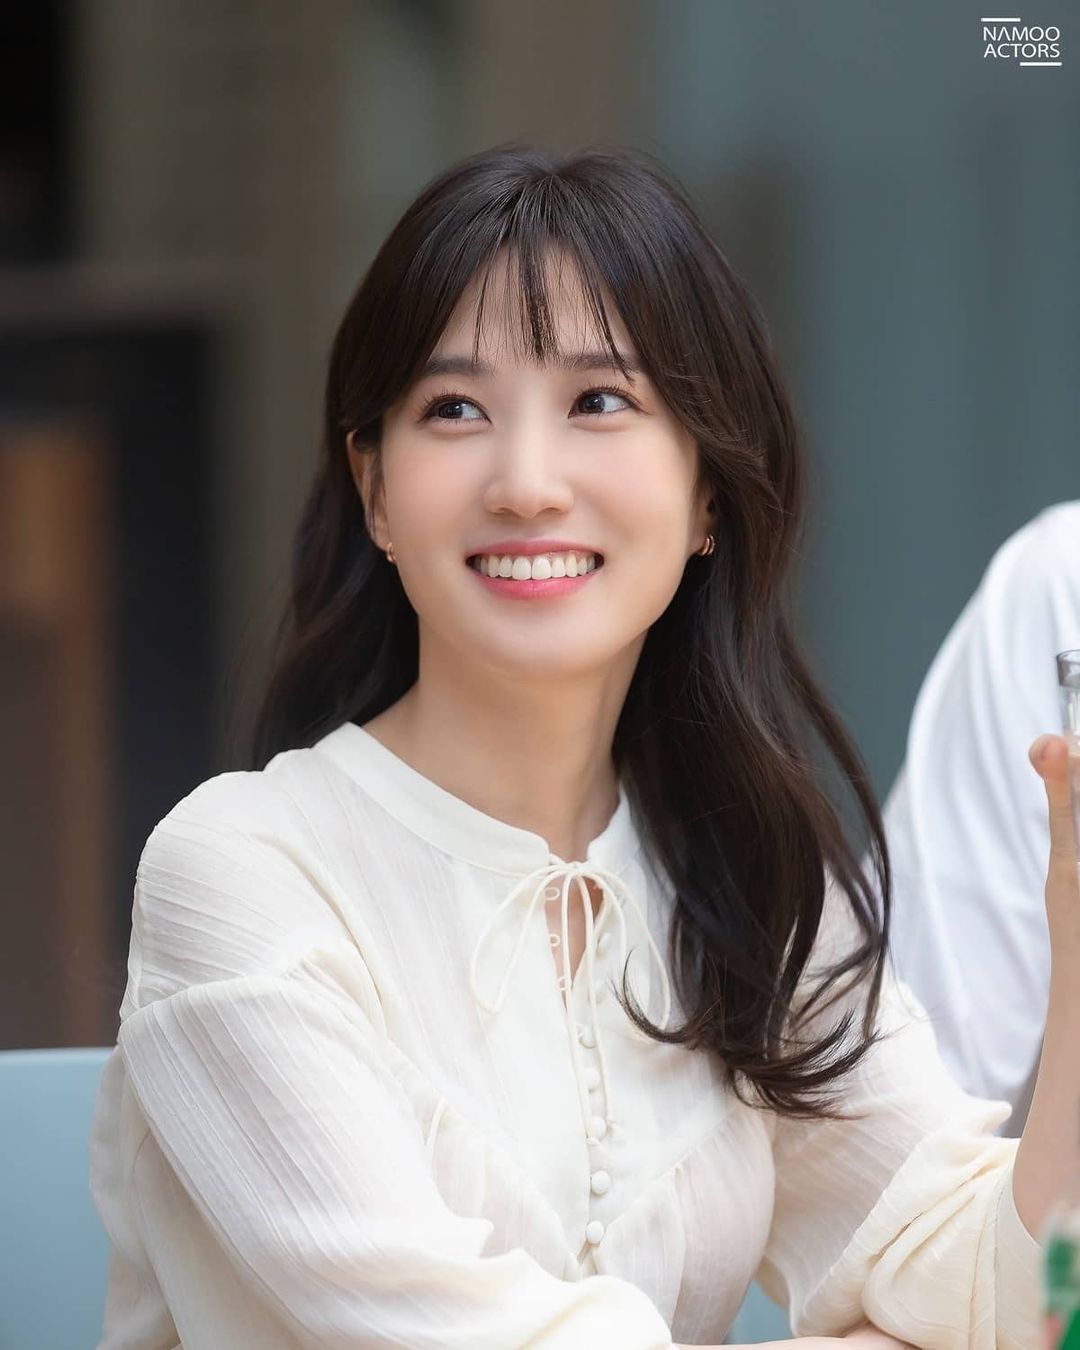 The King's Affection' Star Park Eun Bin to Star in Titular Drama 'Strange Lawyer Woo Young Woo' With Joo Hyun Young